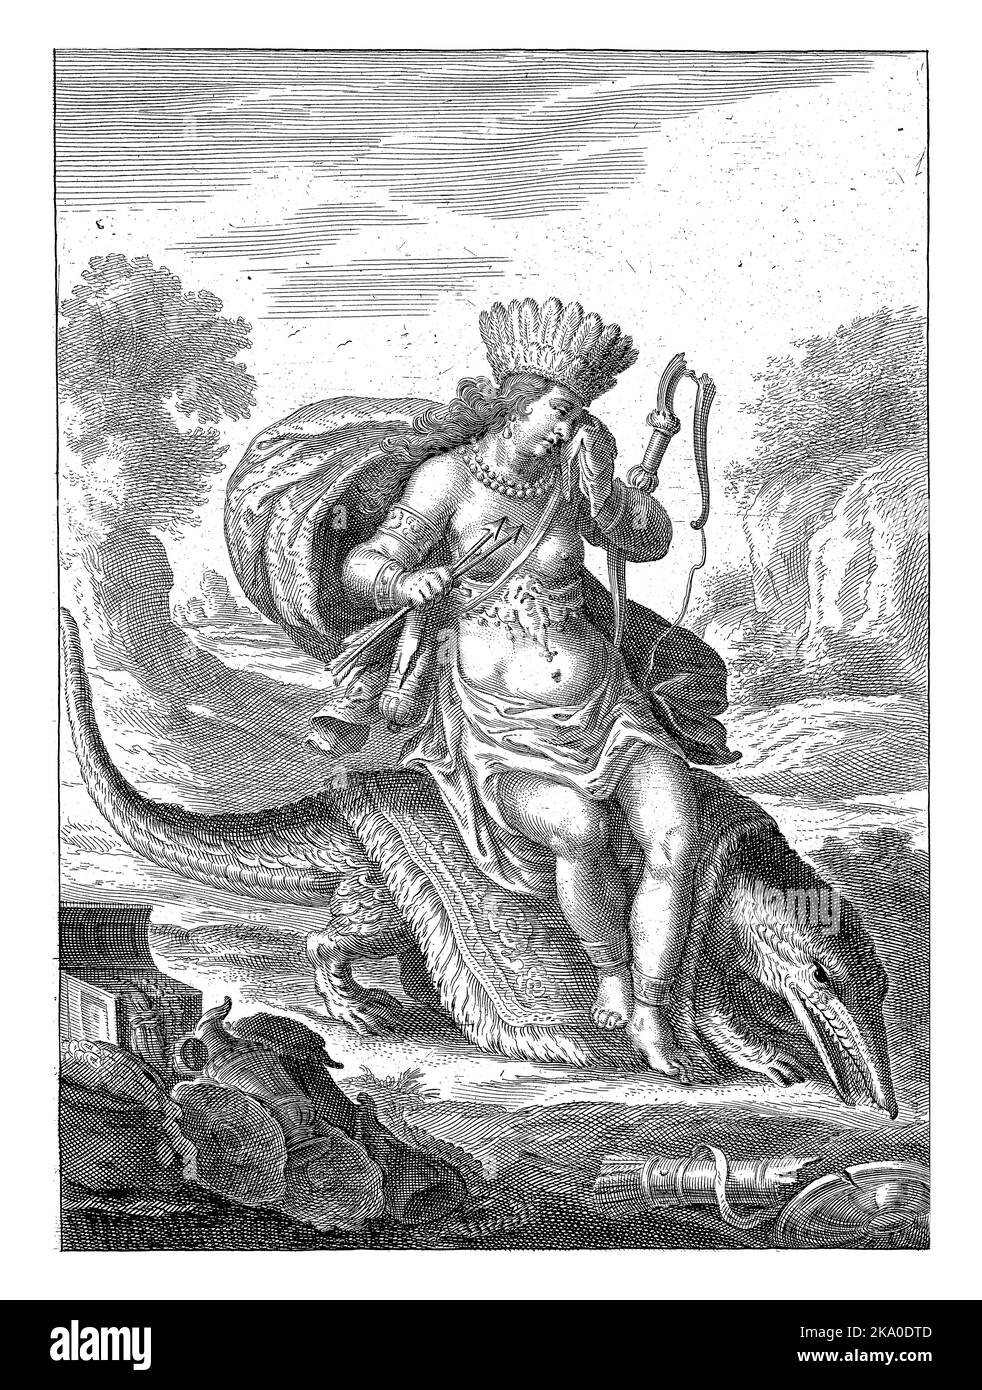 Female personification of America as woman with feather headdress and bow and arrow sitting on caiman or crocodile. Stock Photo